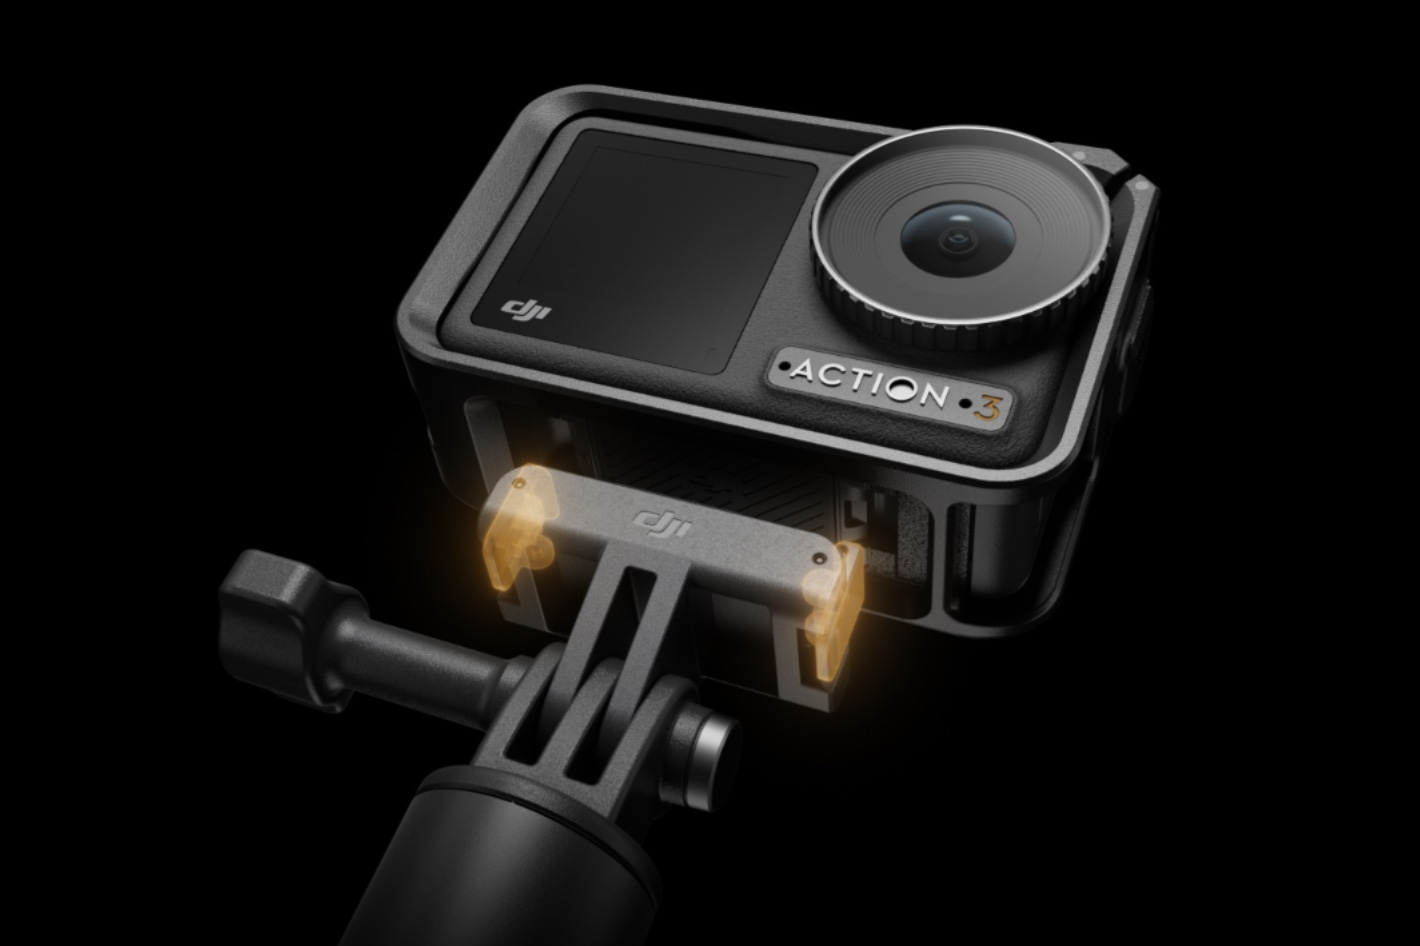 DJI's New Action 3 Camera Might be Coming Soon, But Why?